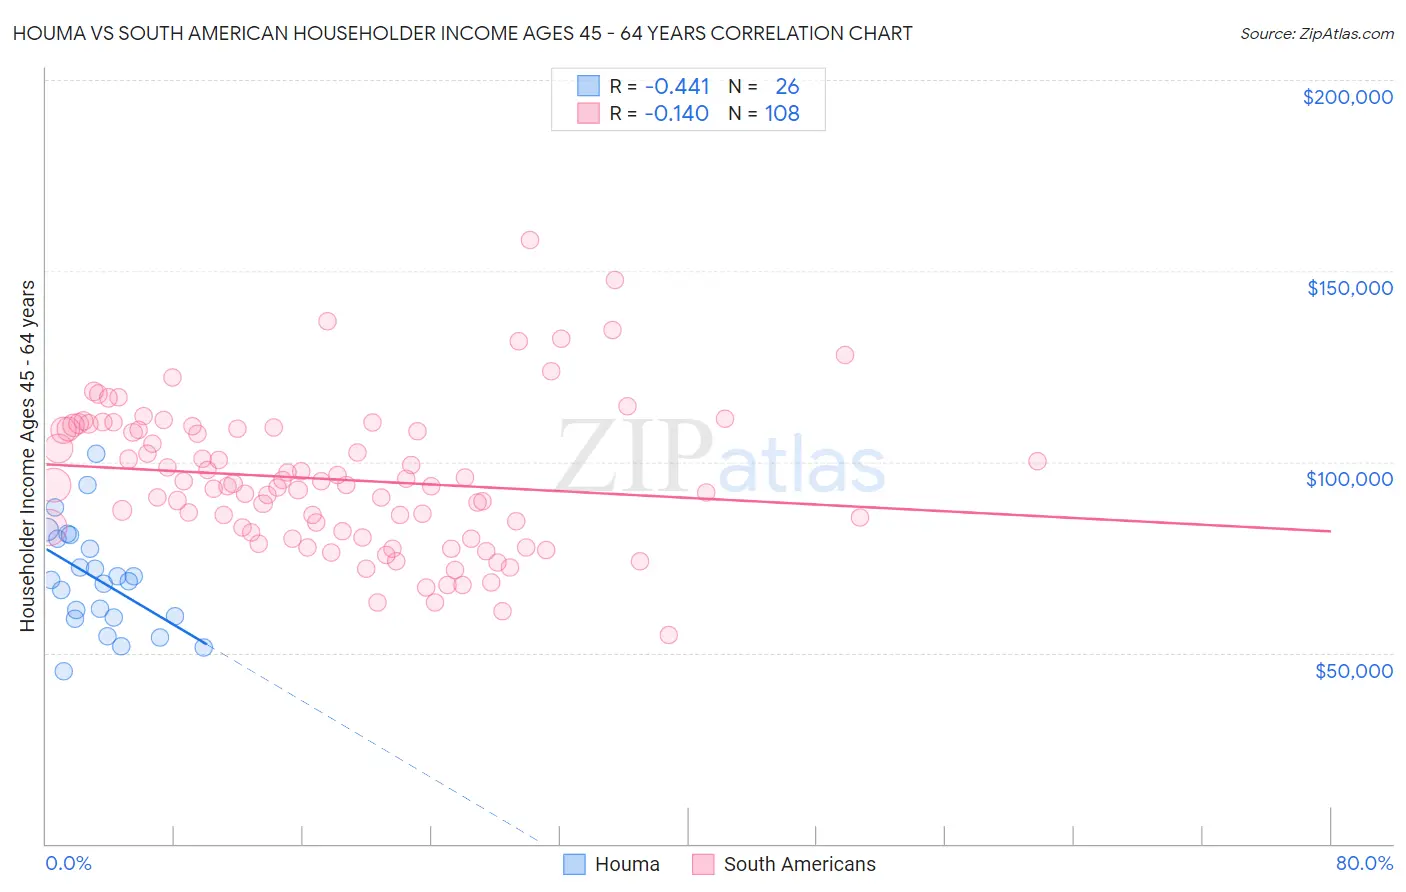 Houma vs South American Householder Income Ages 45 - 64 years